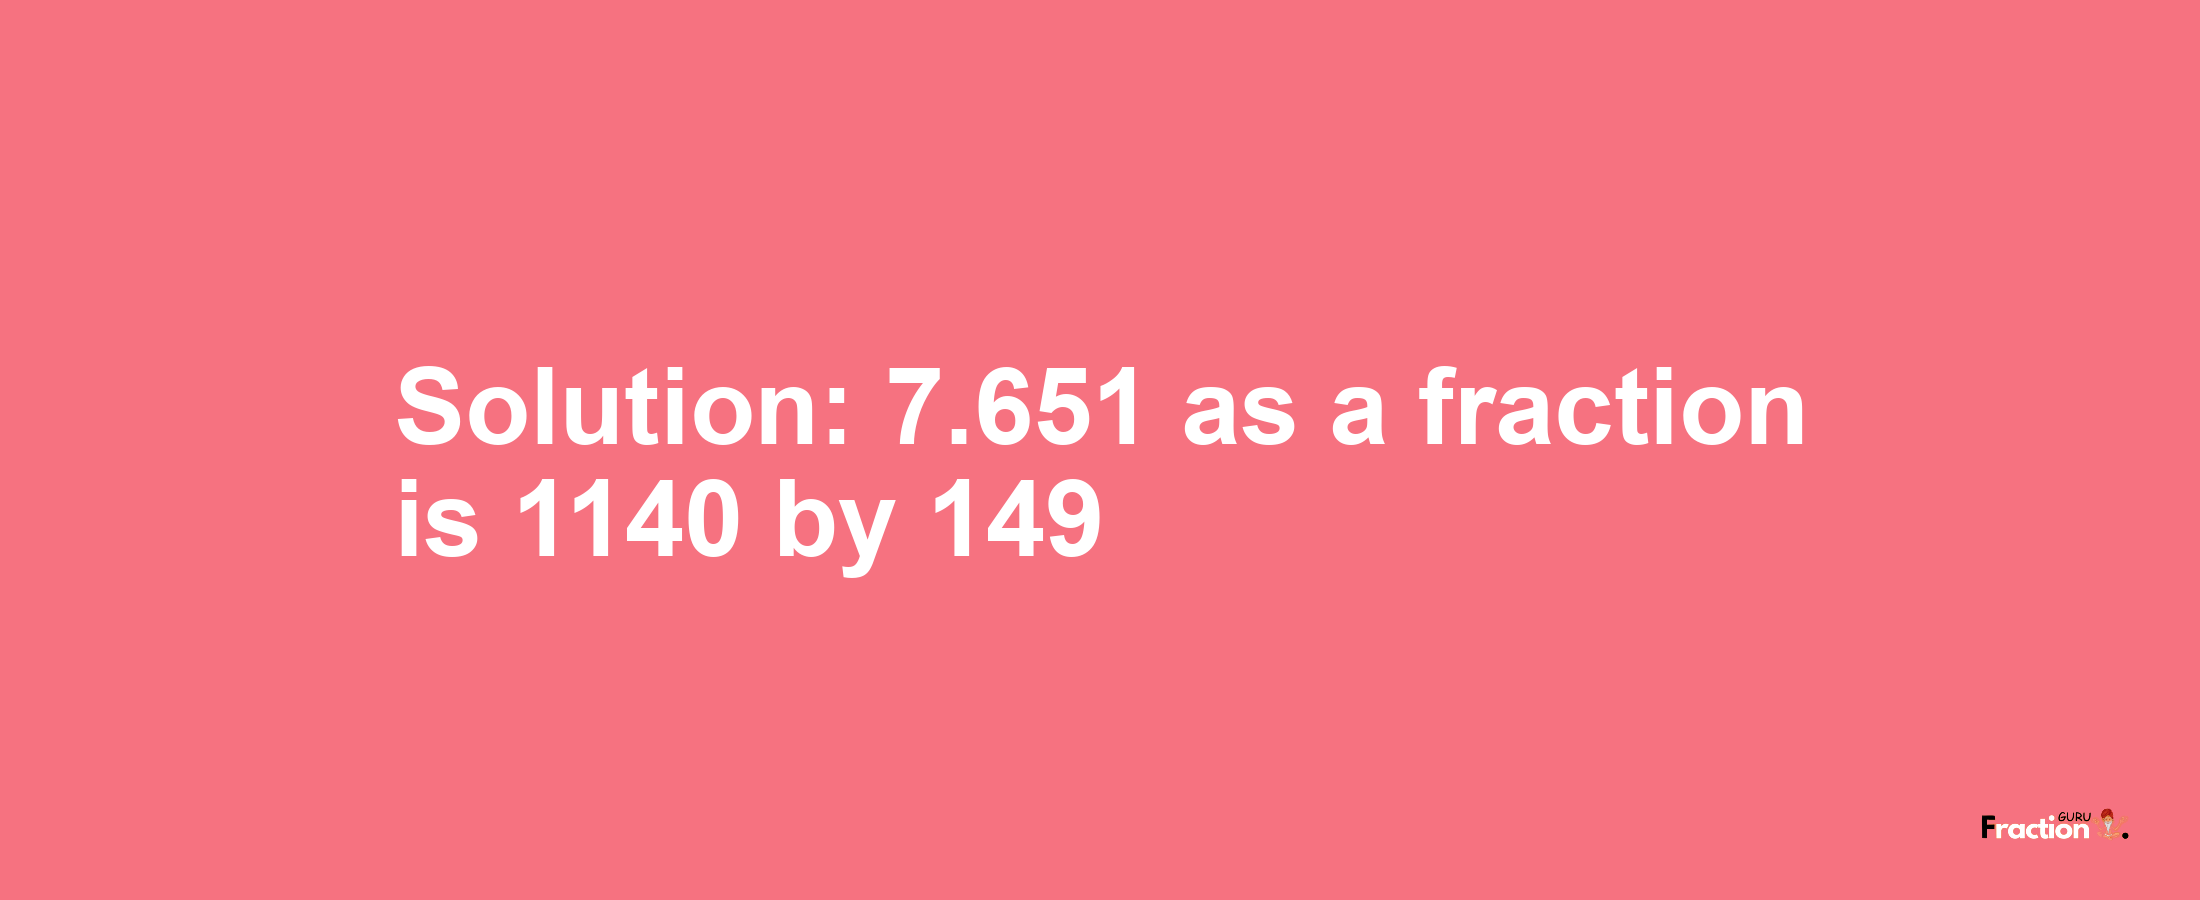 Solution:7.651 as a fraction is 1140/149